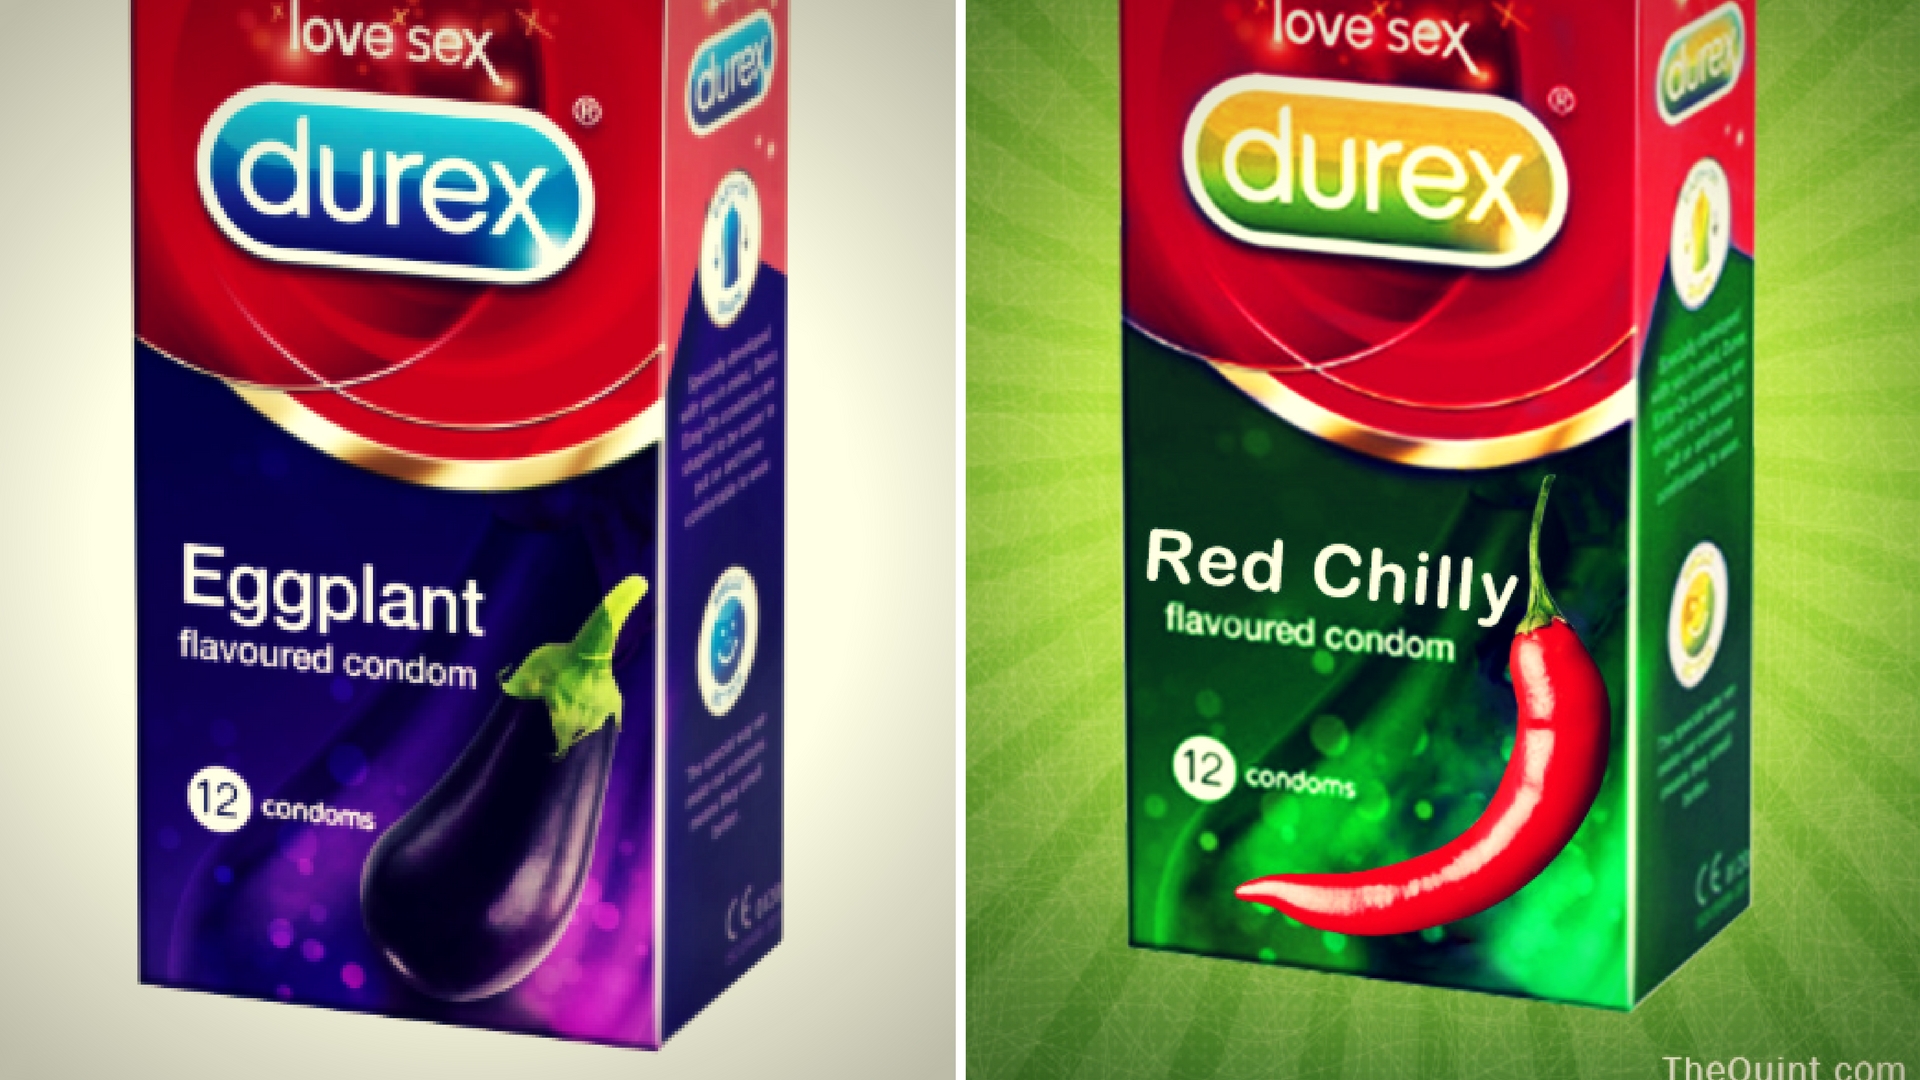 Durex Fake Eggplant Flavoured Condom Titillated Our Wicked Minds